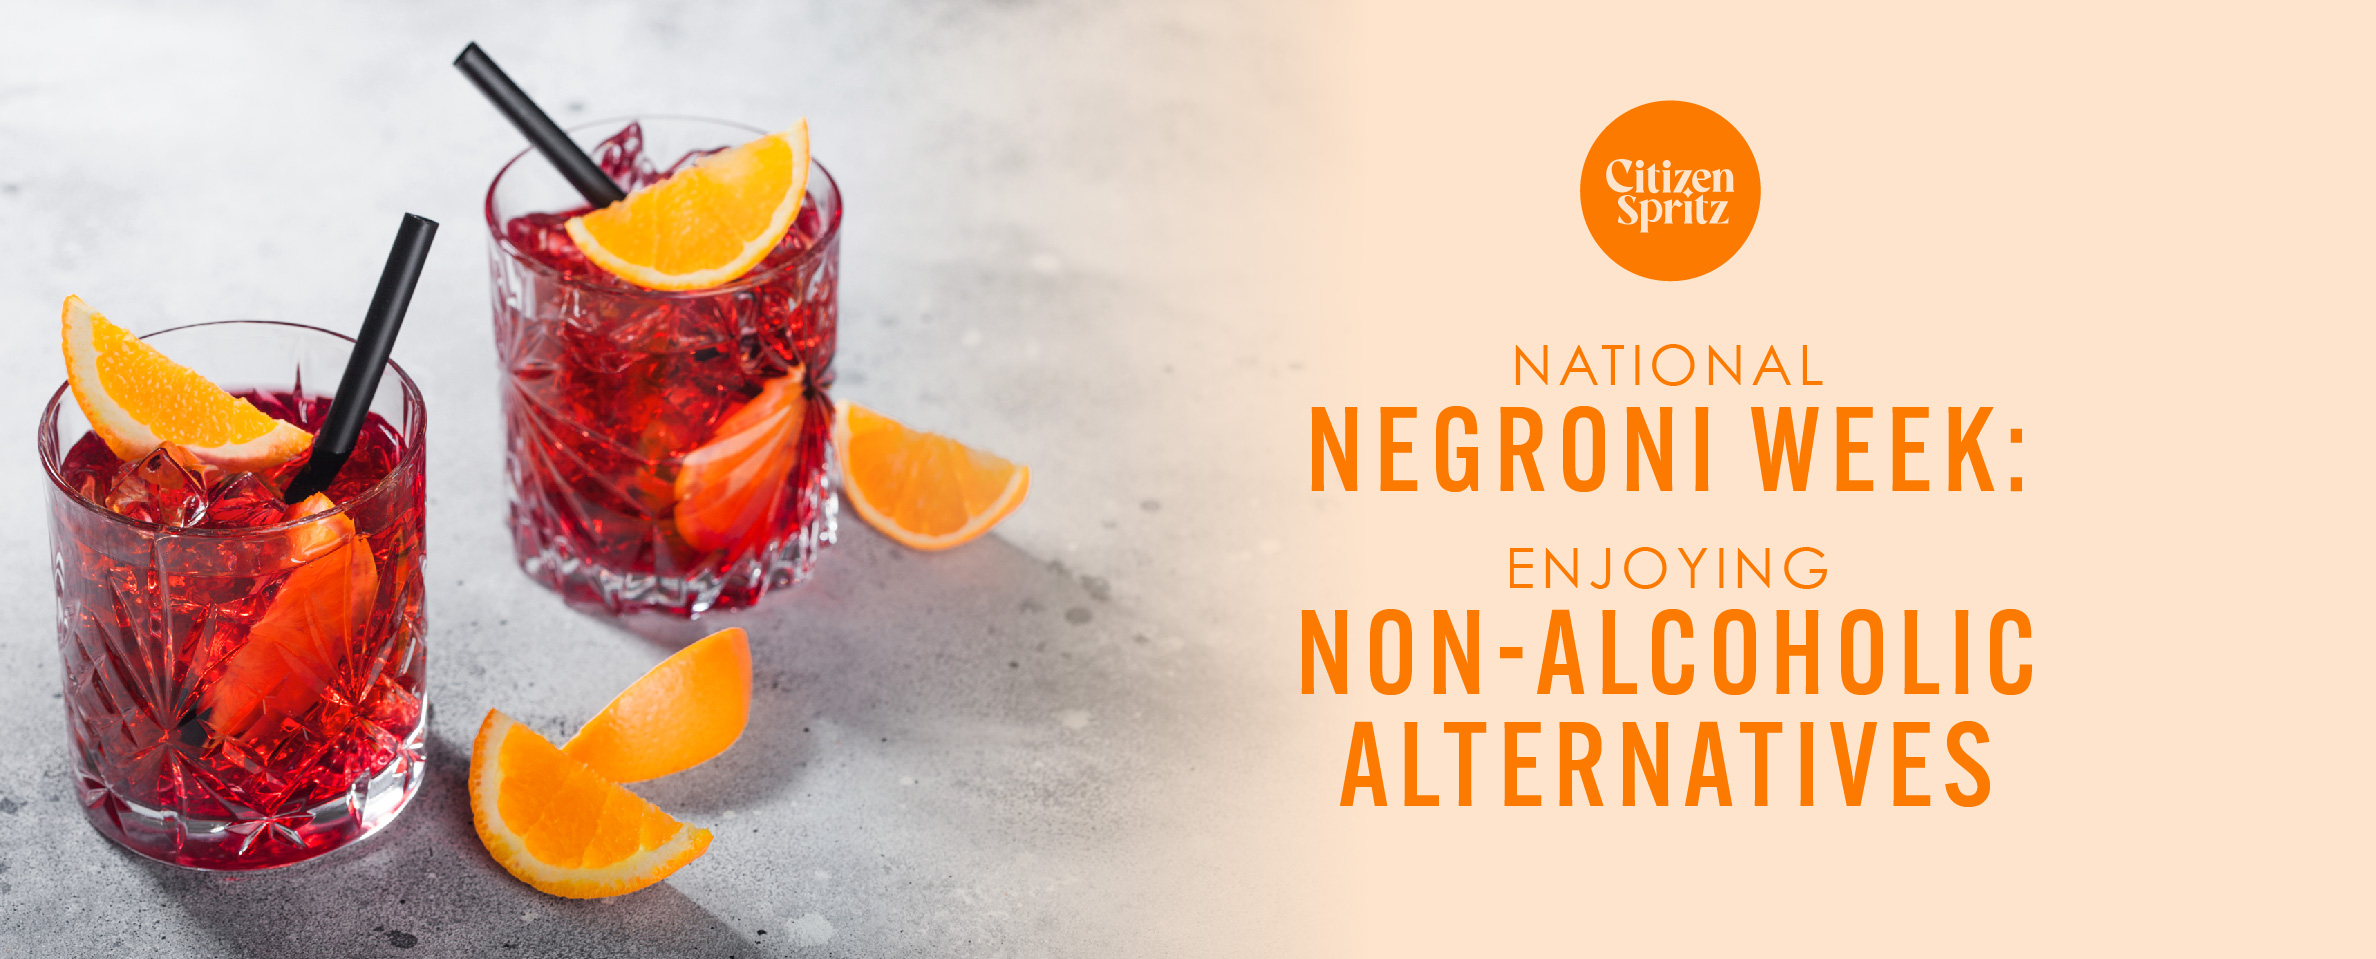 Two glasses of non-alcoholic Negroni garnished with orange slices and served with black straws, placed on a light grey surface. The text on the right side of the image reads 'Citizen Spritz - National Negroni Week: Enjoying Non-Alcoholic Alternatives' in orange and black letters.